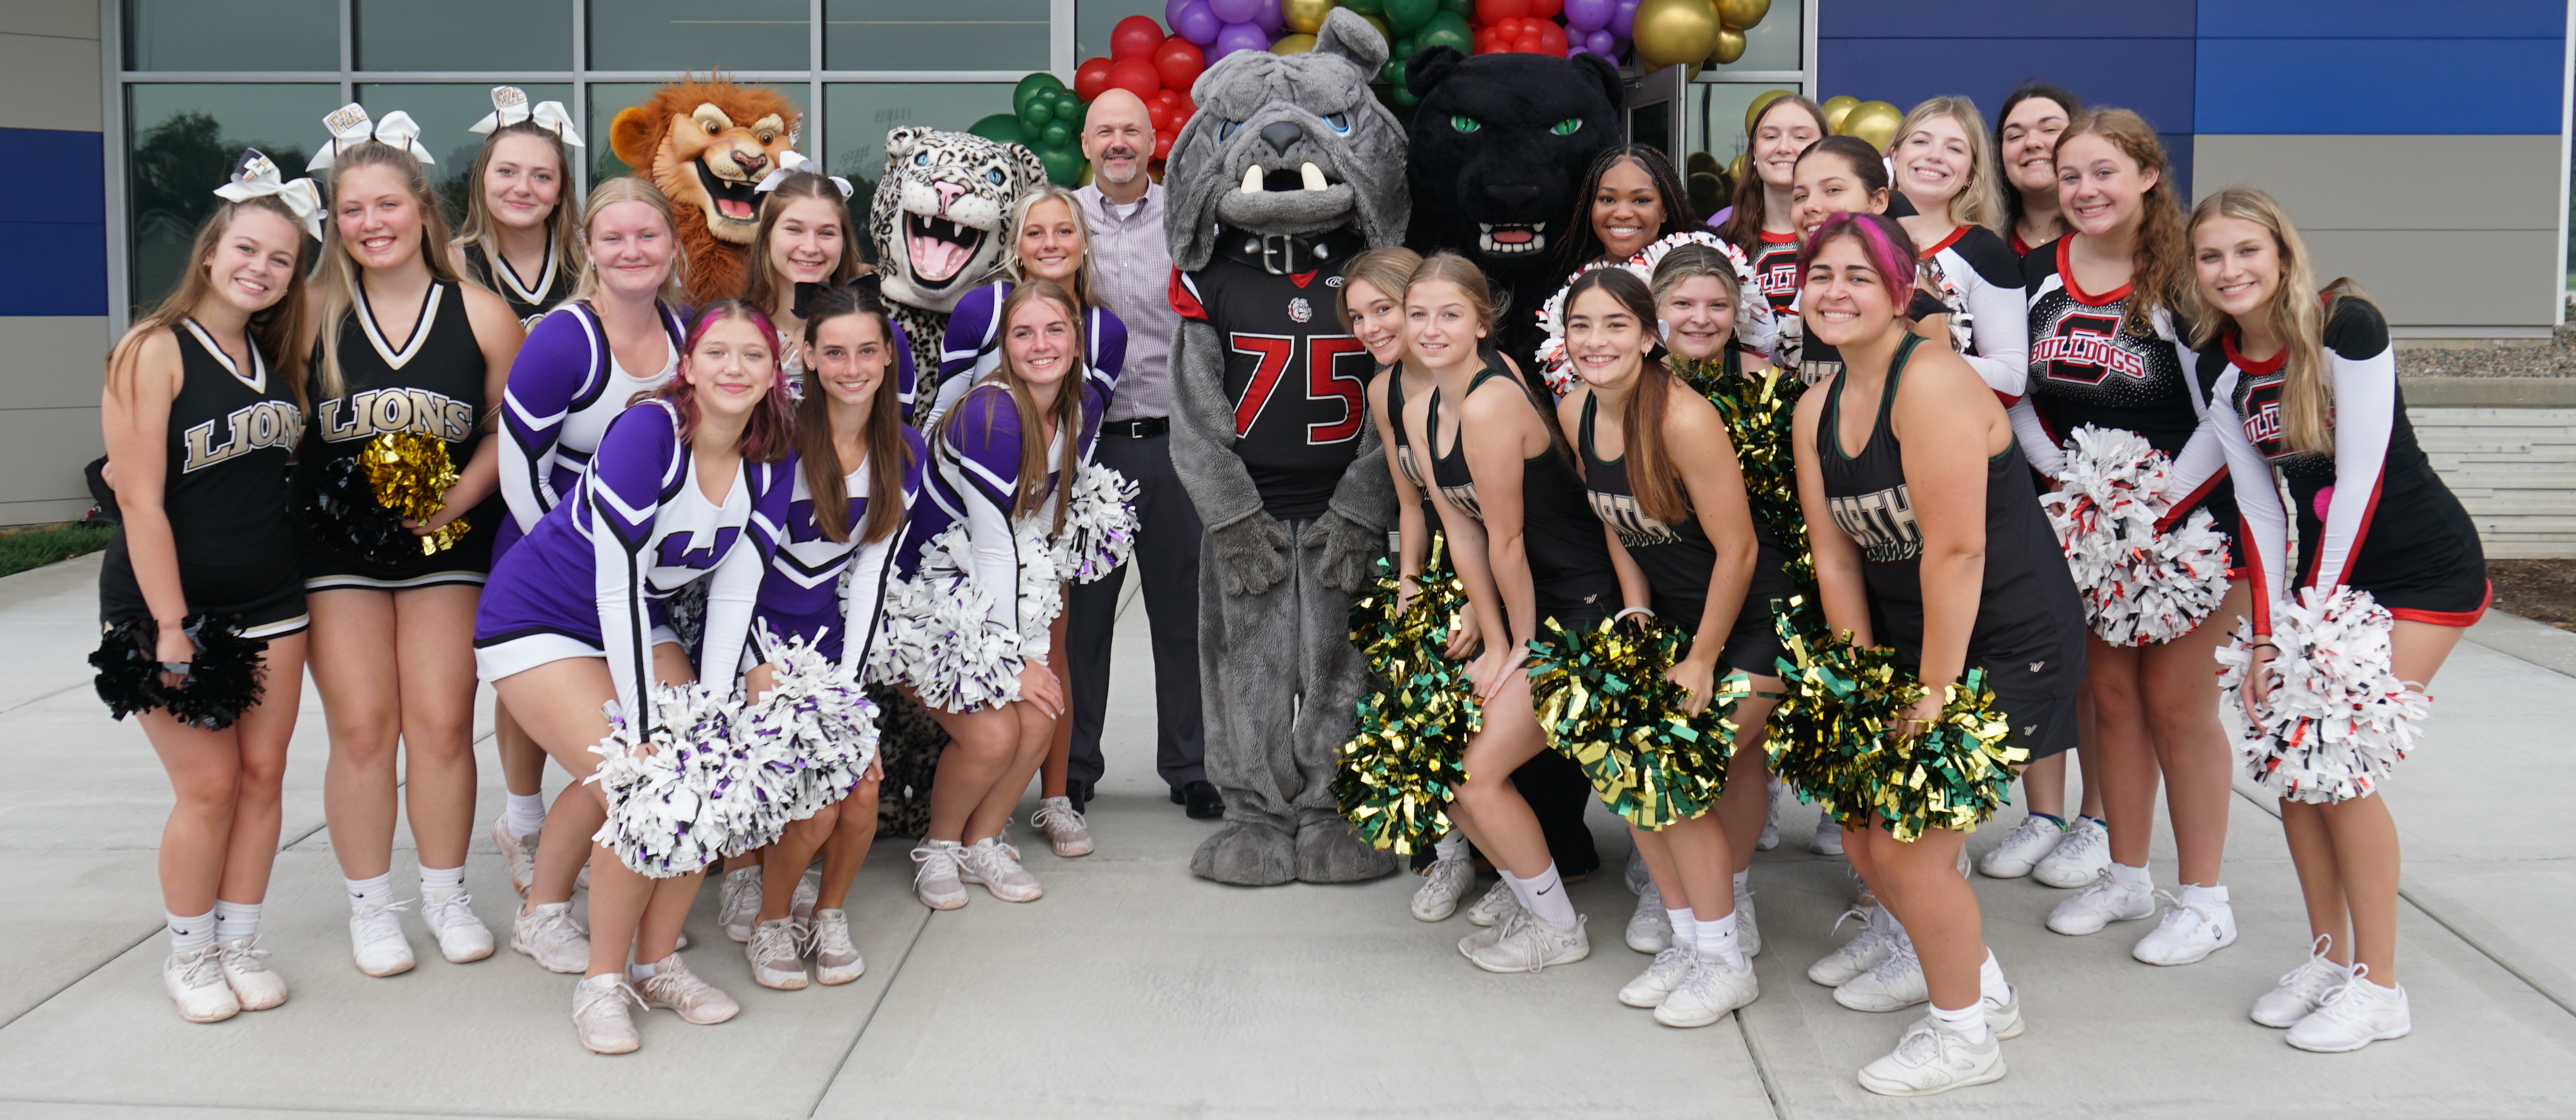 Superintendent with high school mascots and cheerleaders welcoming new educators to the school year